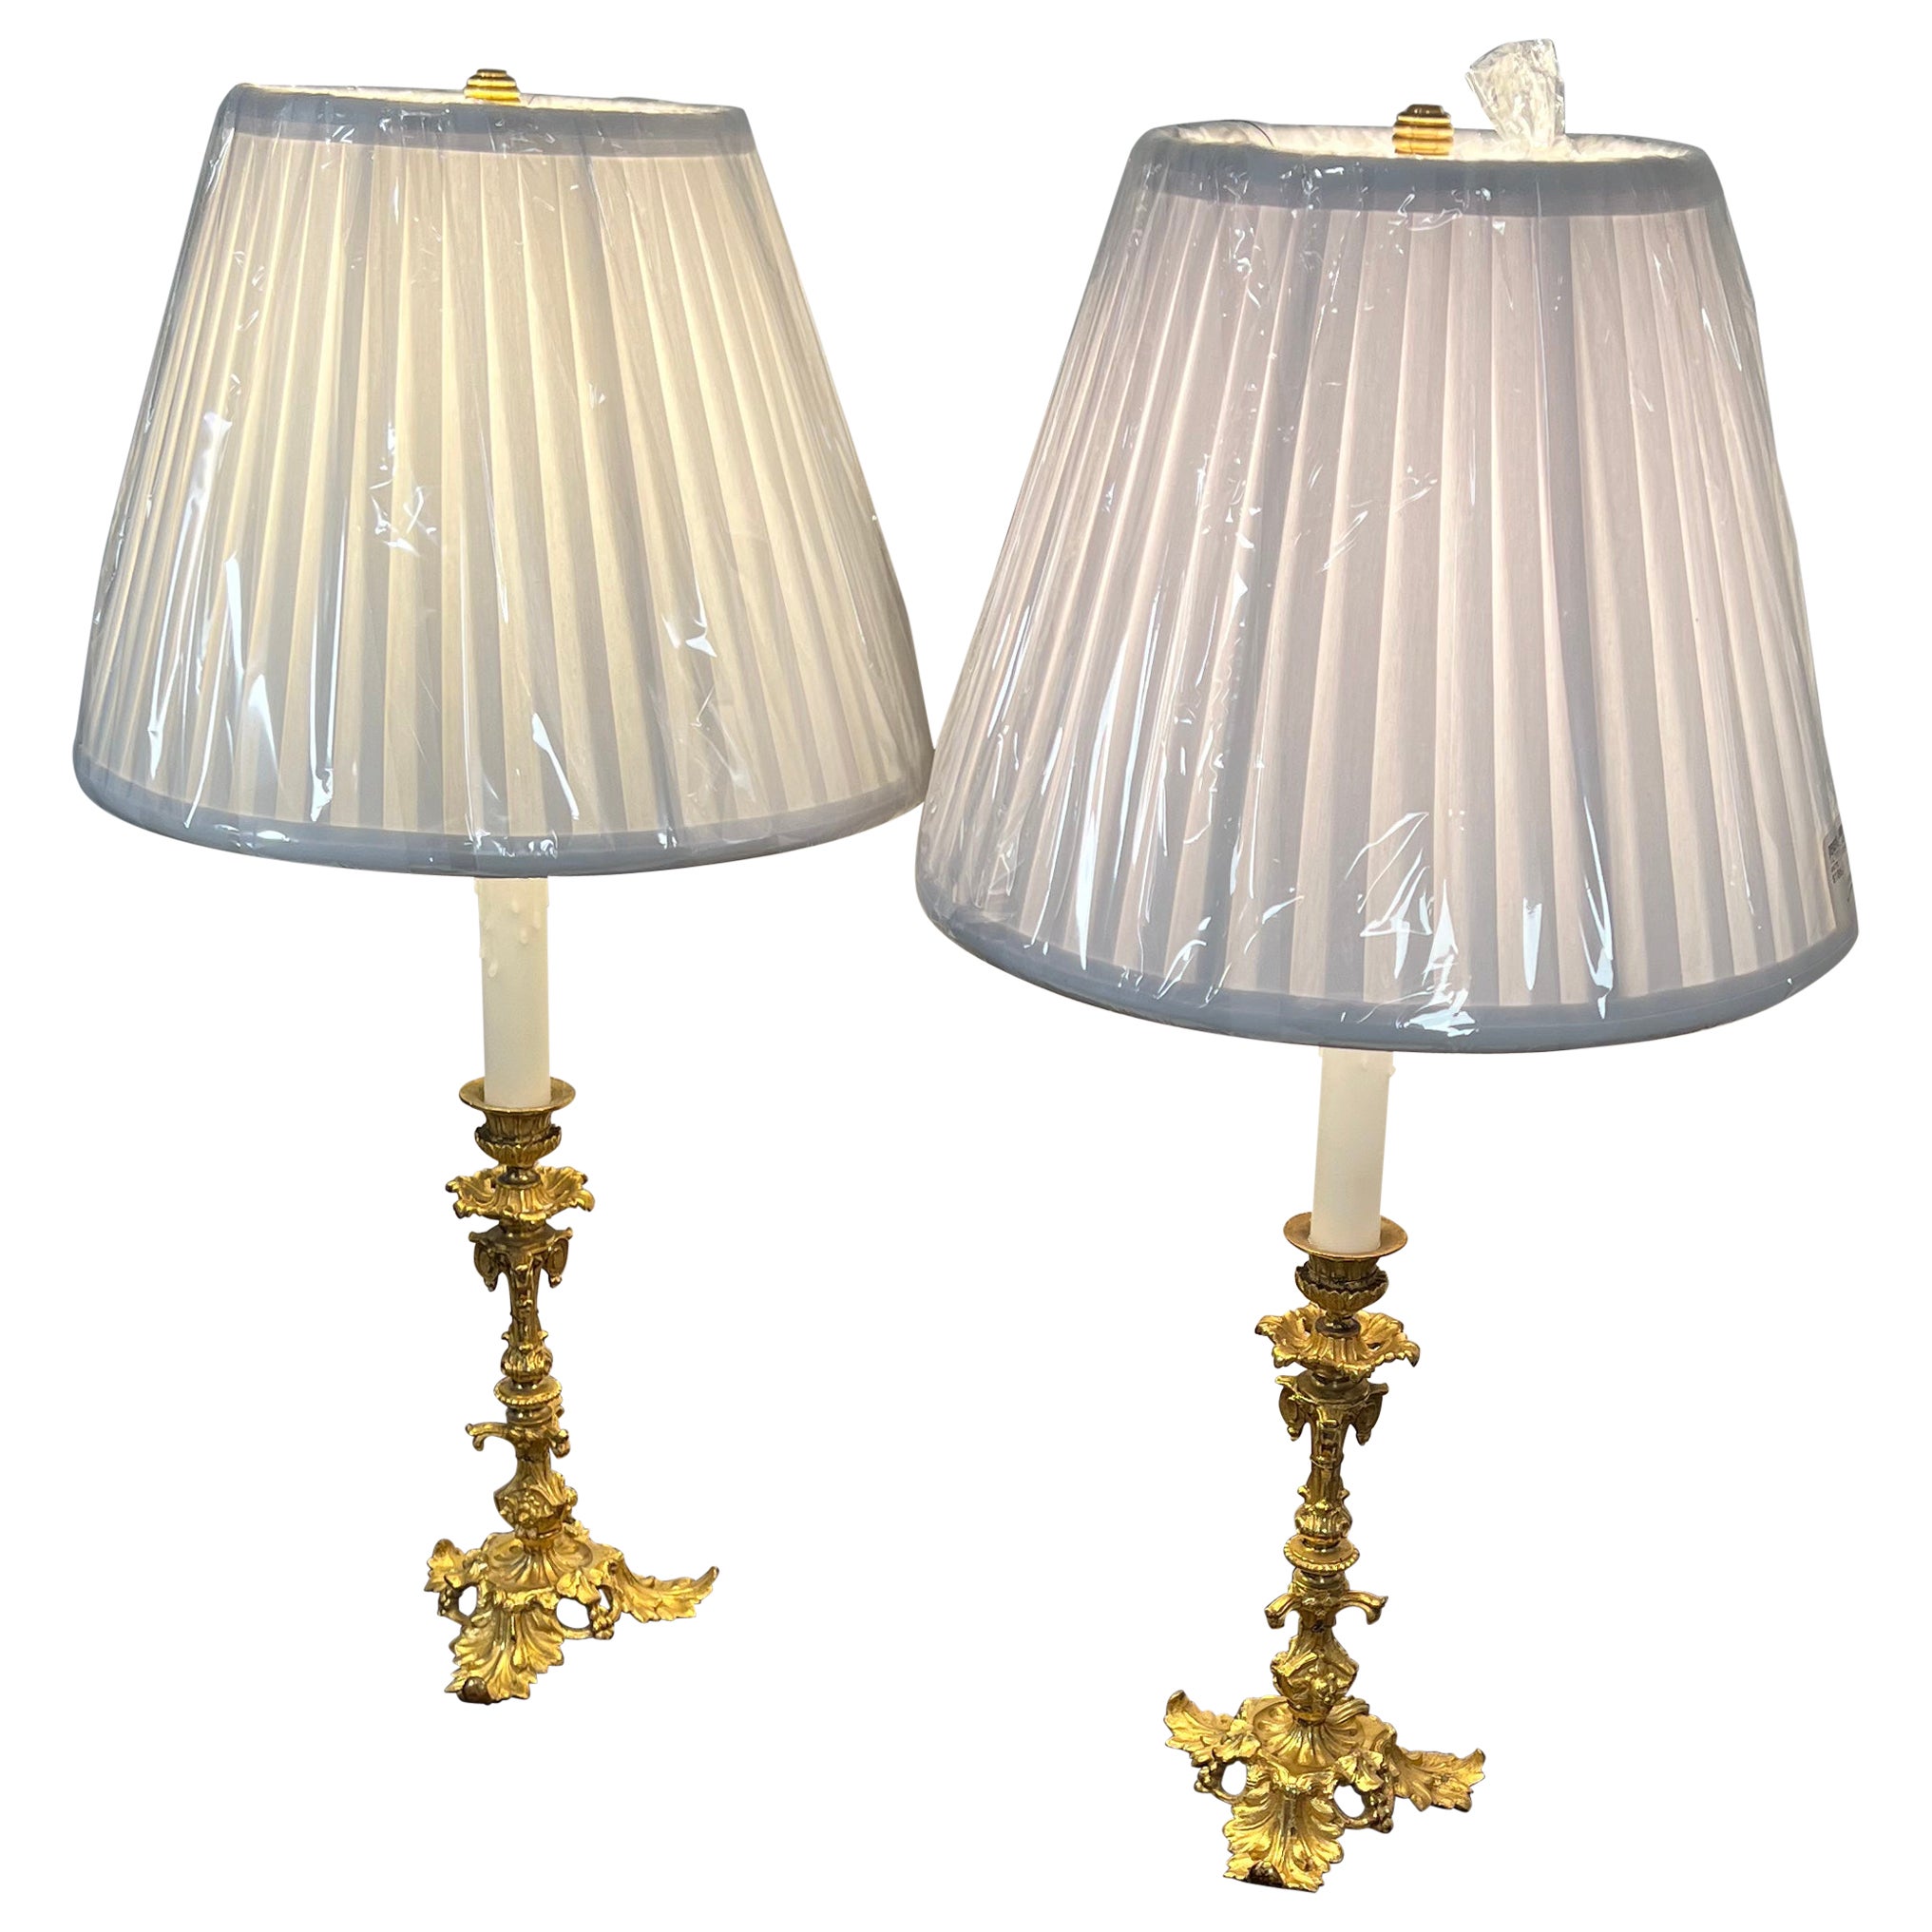 Pair of Ormolu Candlestick Form Lamps, 19th Century with Pleated Shades For Sale